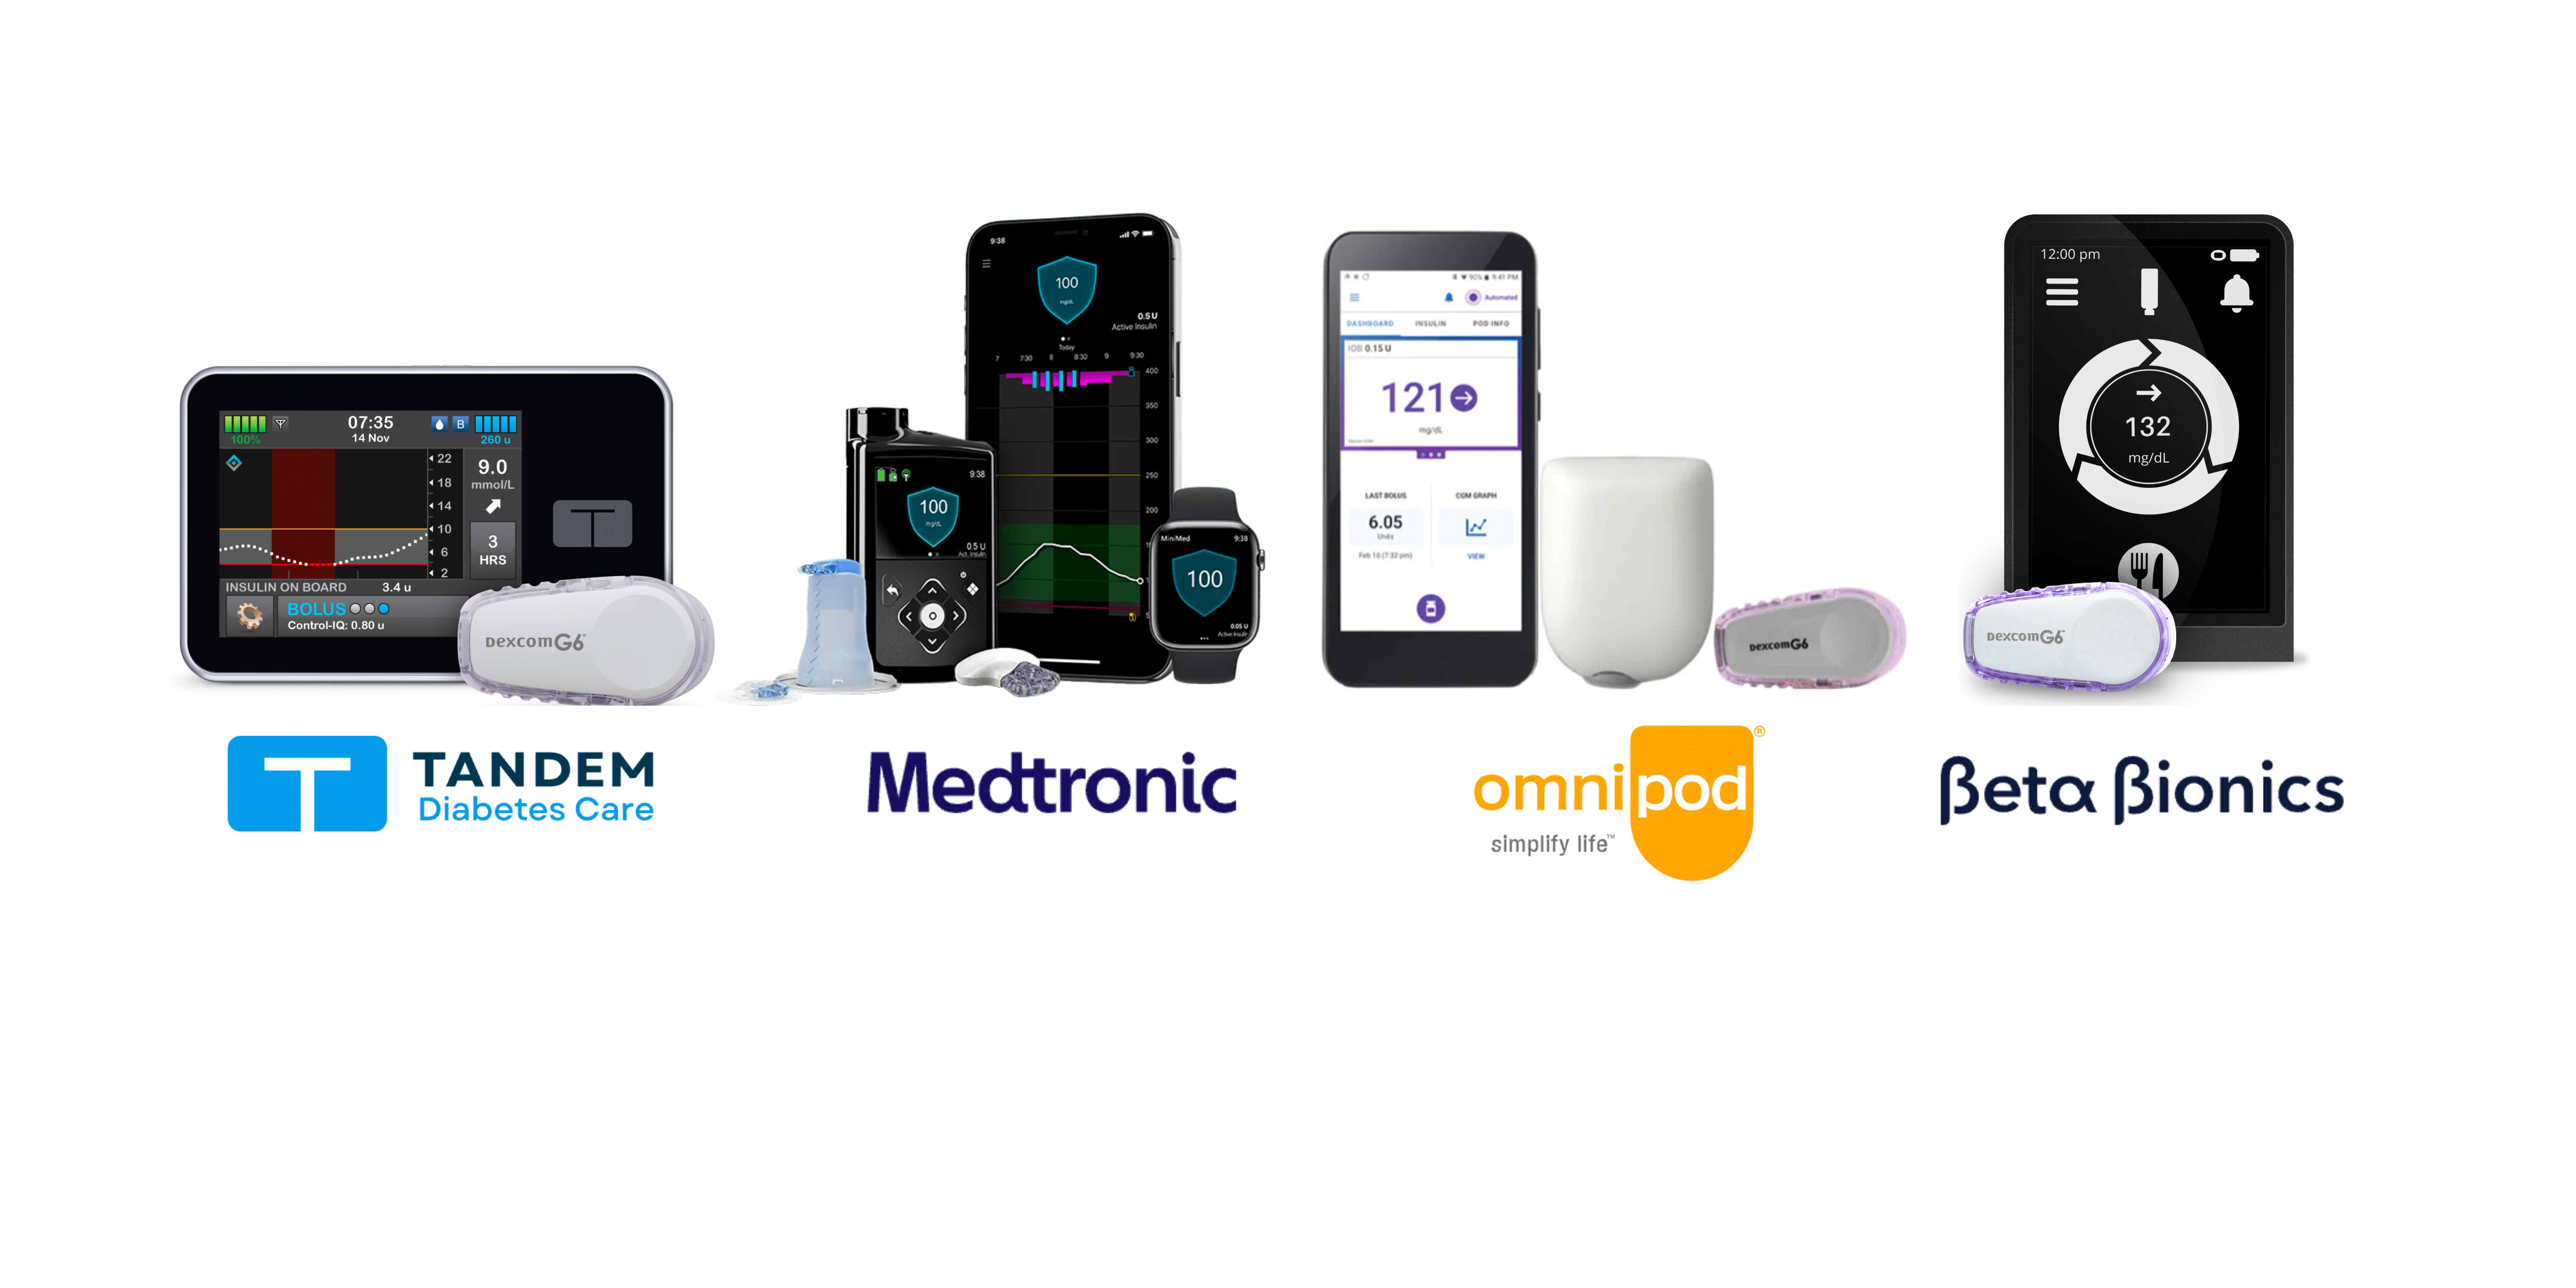 SUPPORTED PUMPS: TANDEM, MEDTRONIC, INSULET (OMNIPOD), BETA BIONICS